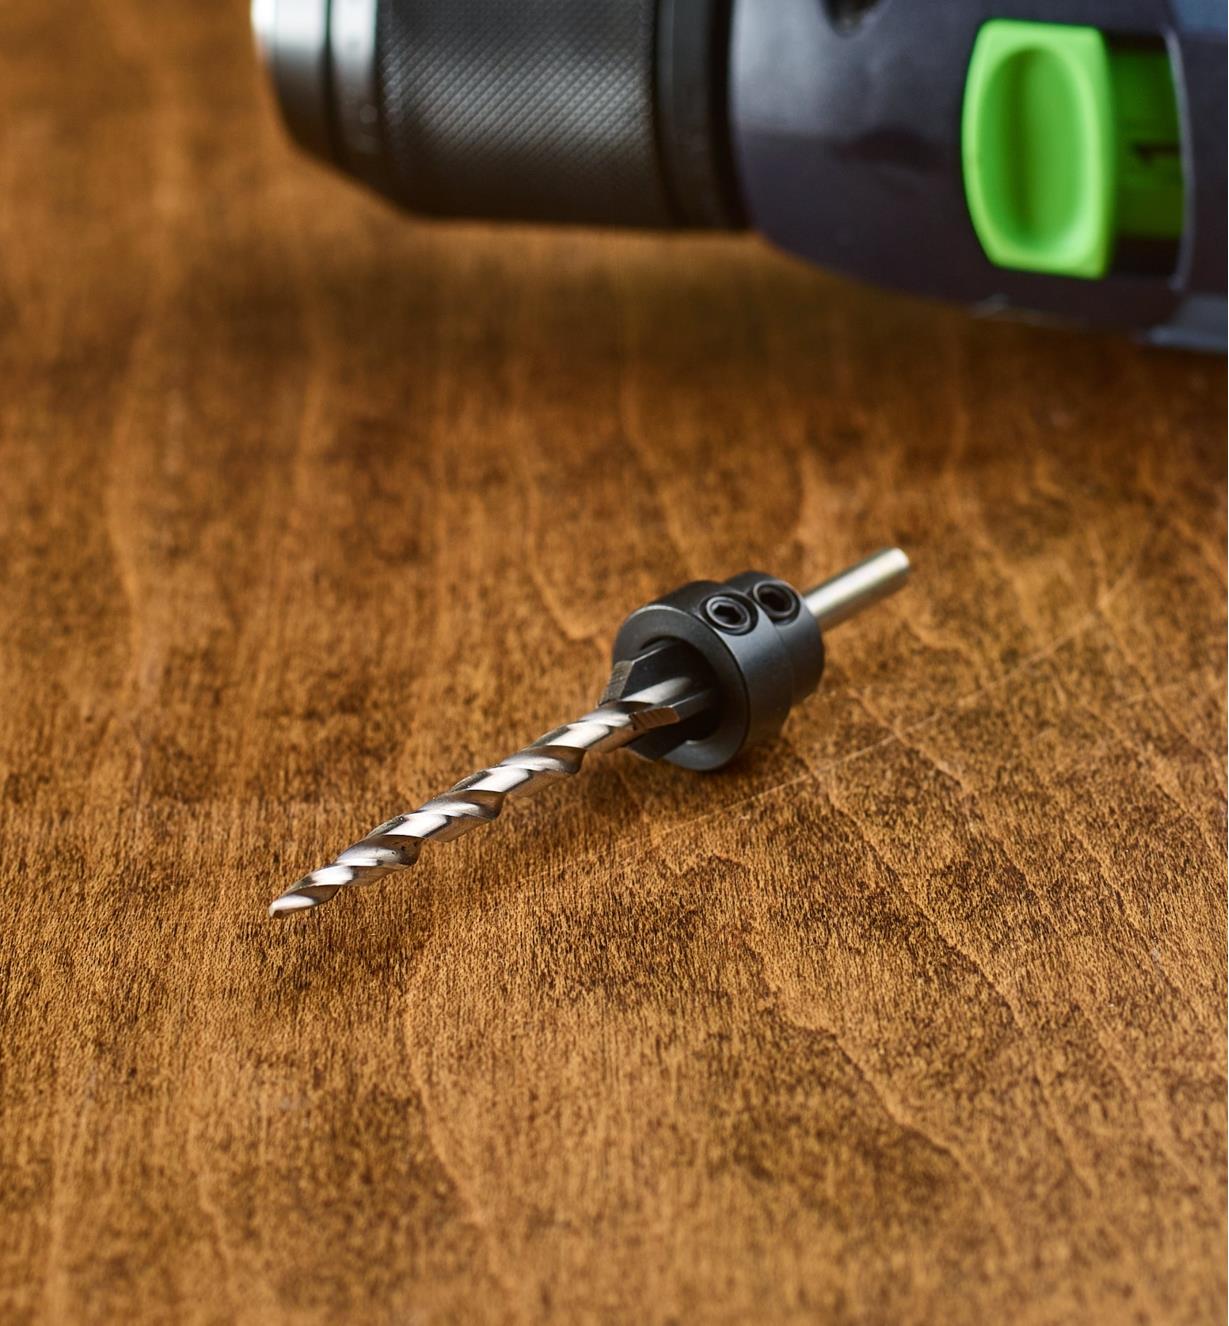 A drill bit with a stop collar sits in front of a drill on a table